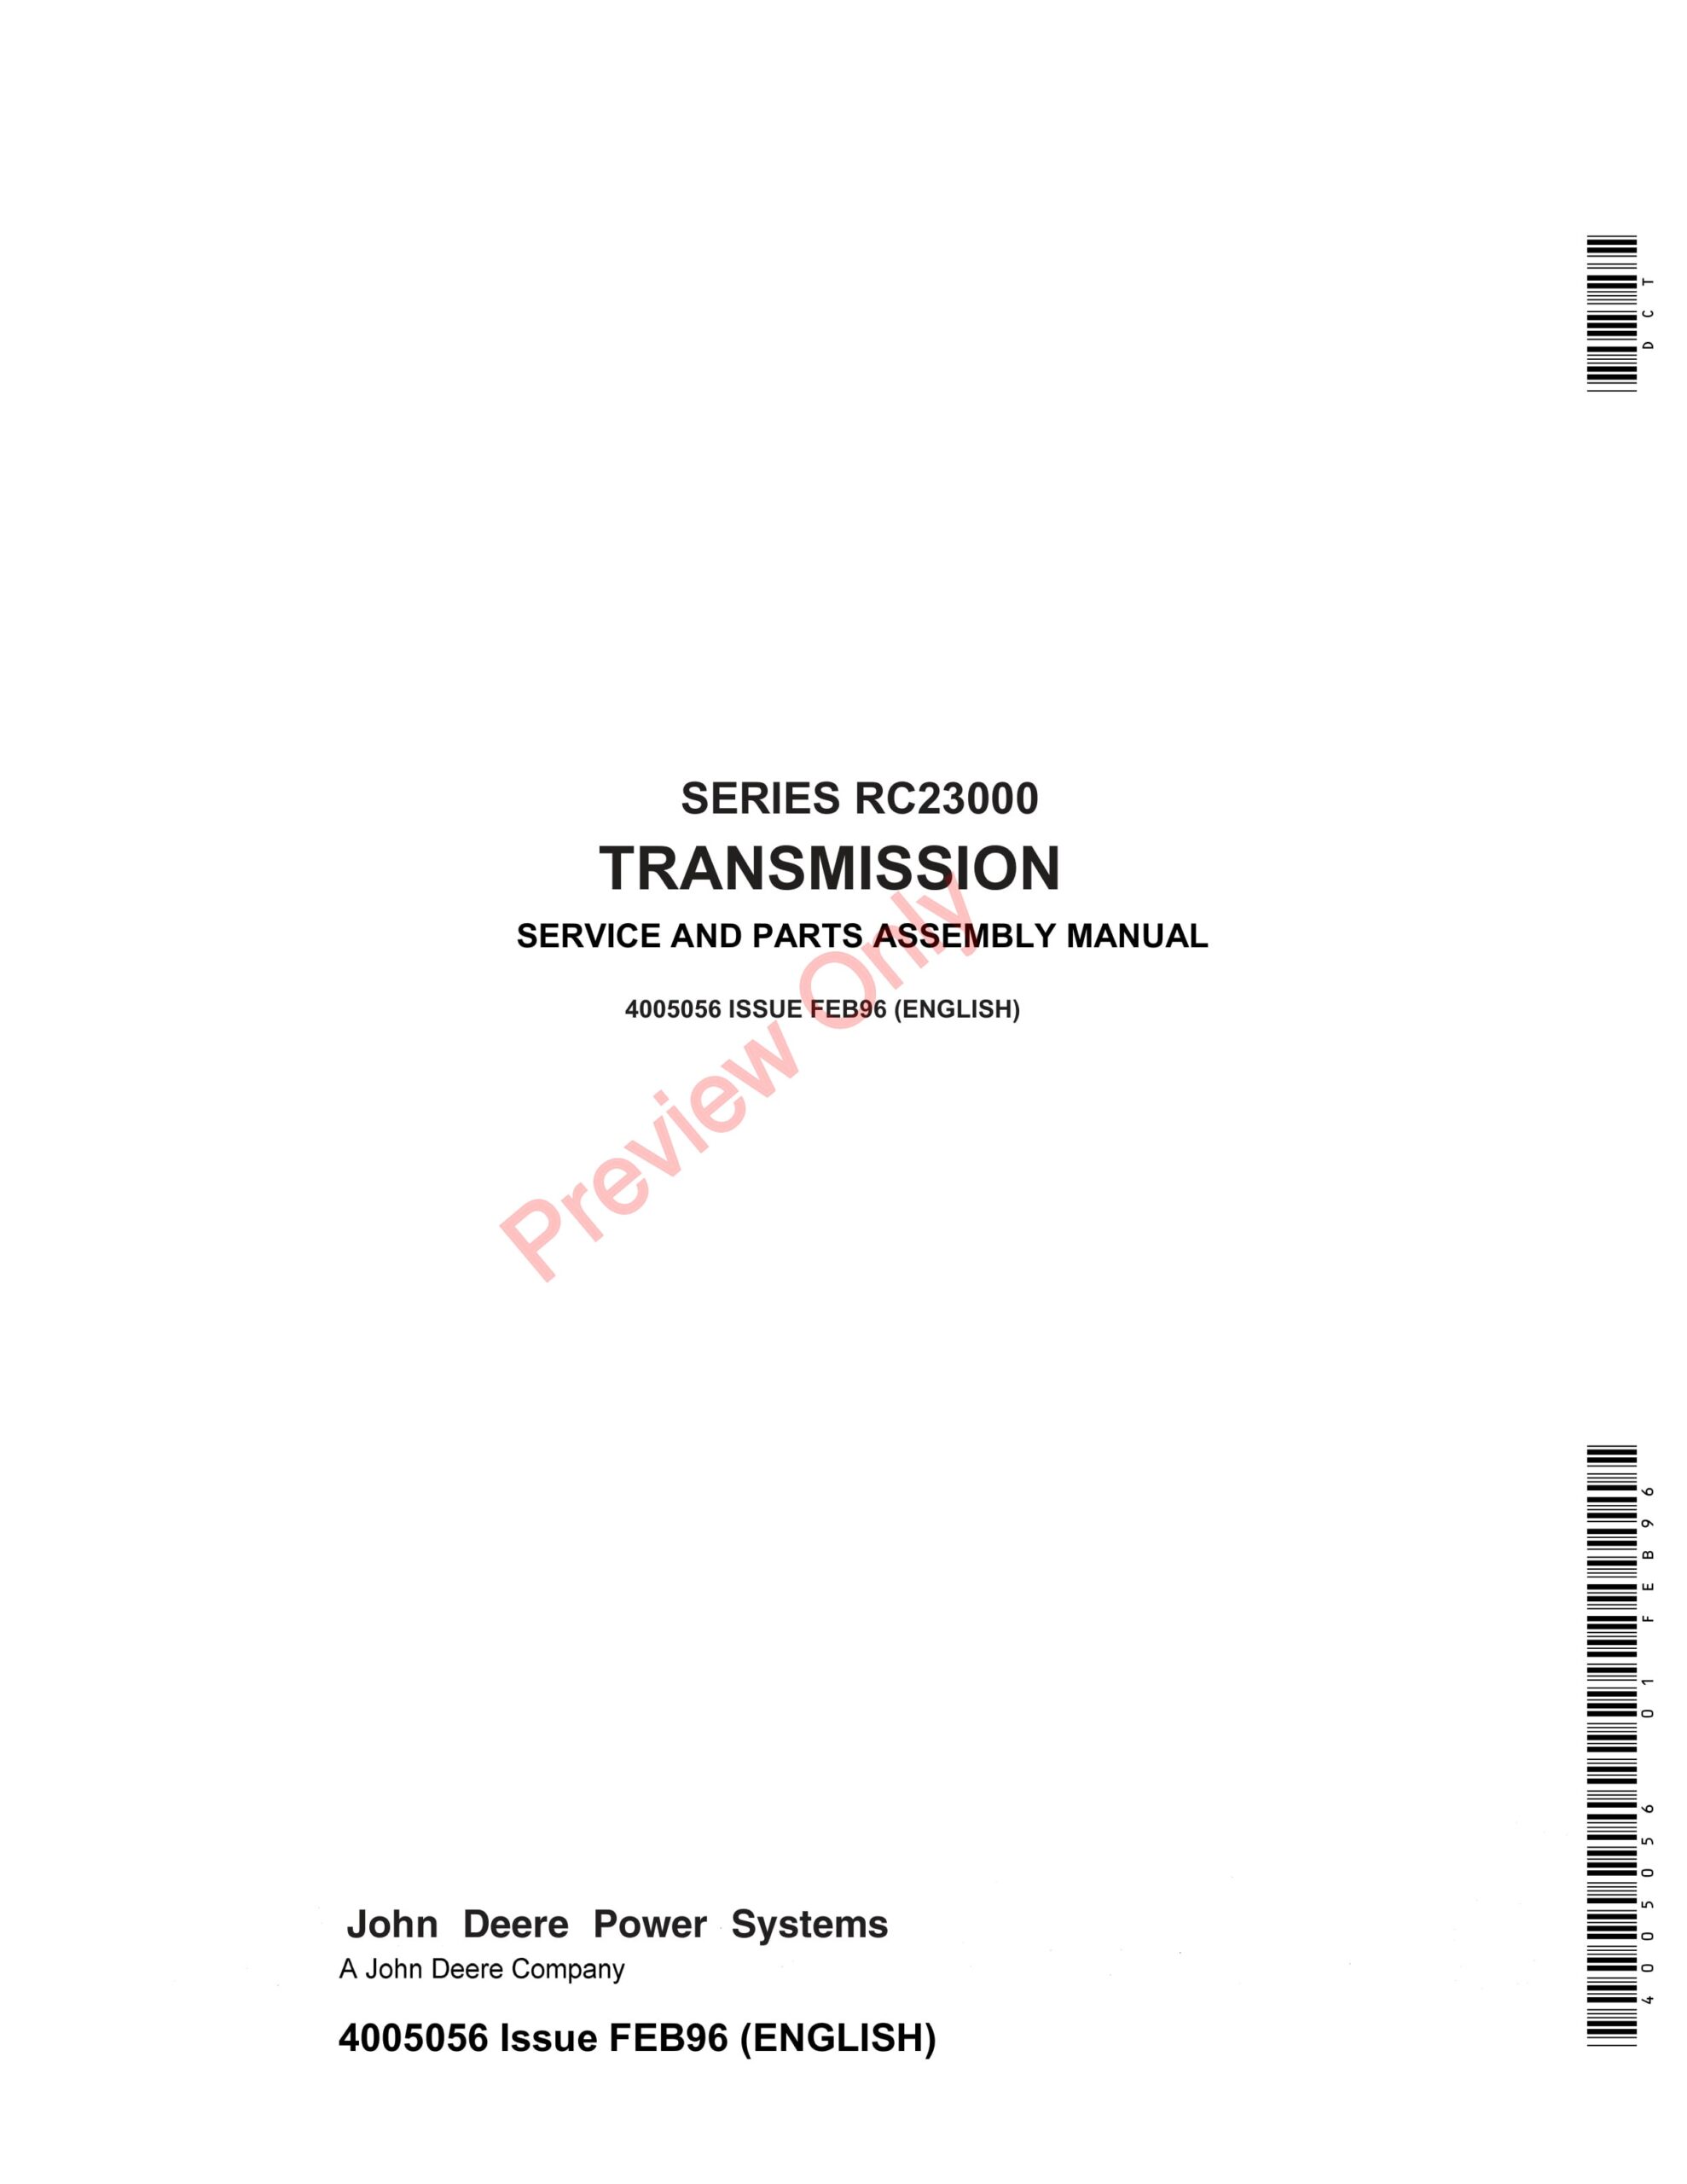 John Deere RC23000 Series Hydraulic Motor Driven Transmission Service and Parts Assembly Manual 4005056 01FEB96-1